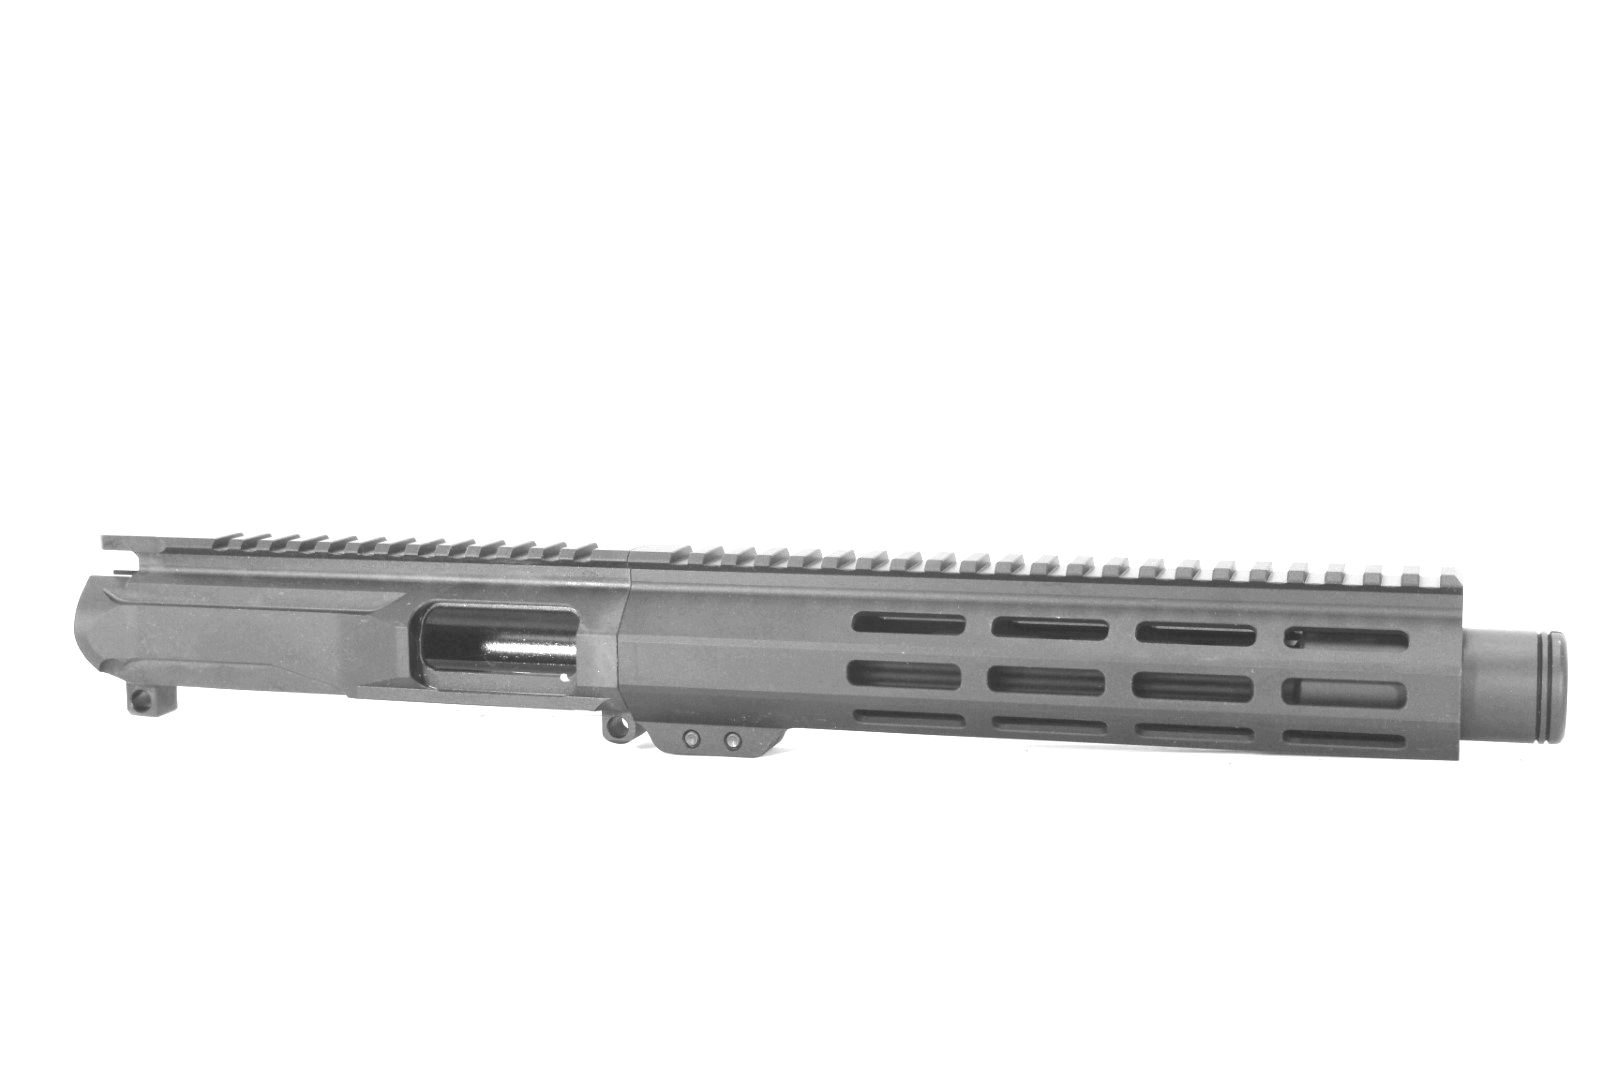 8 inch AR-15 AR15 9mm Pistol Caliber Melonite Upper with Flash Can